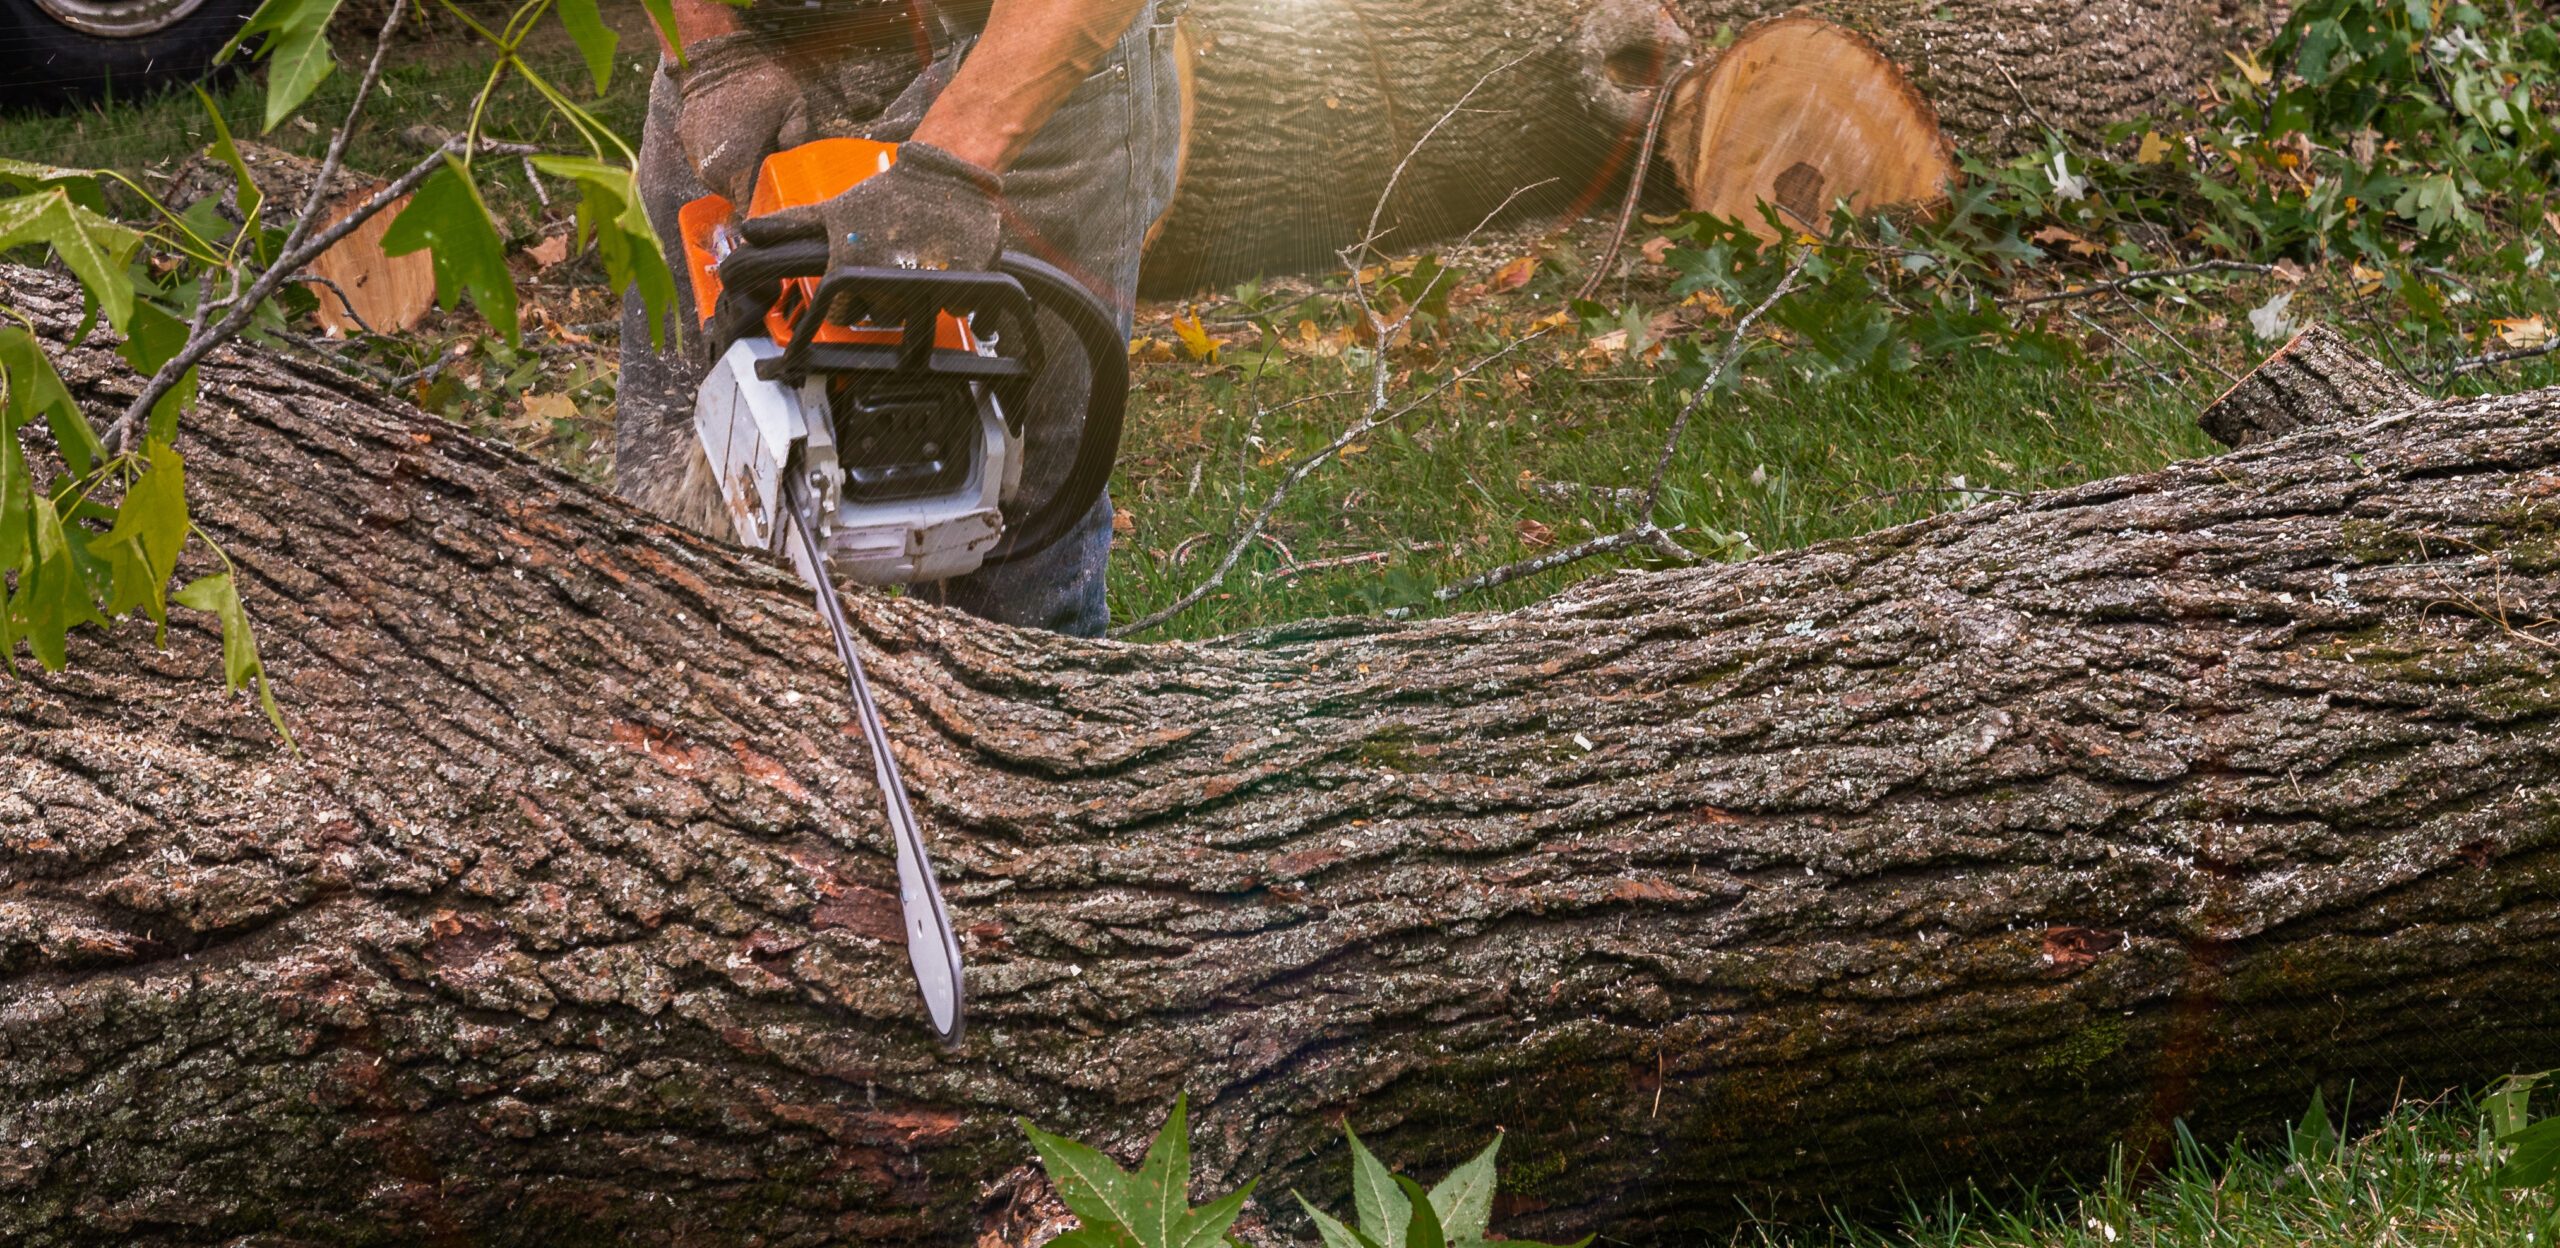 Looking for tree removal or tree trimming in Wellington? Start here.